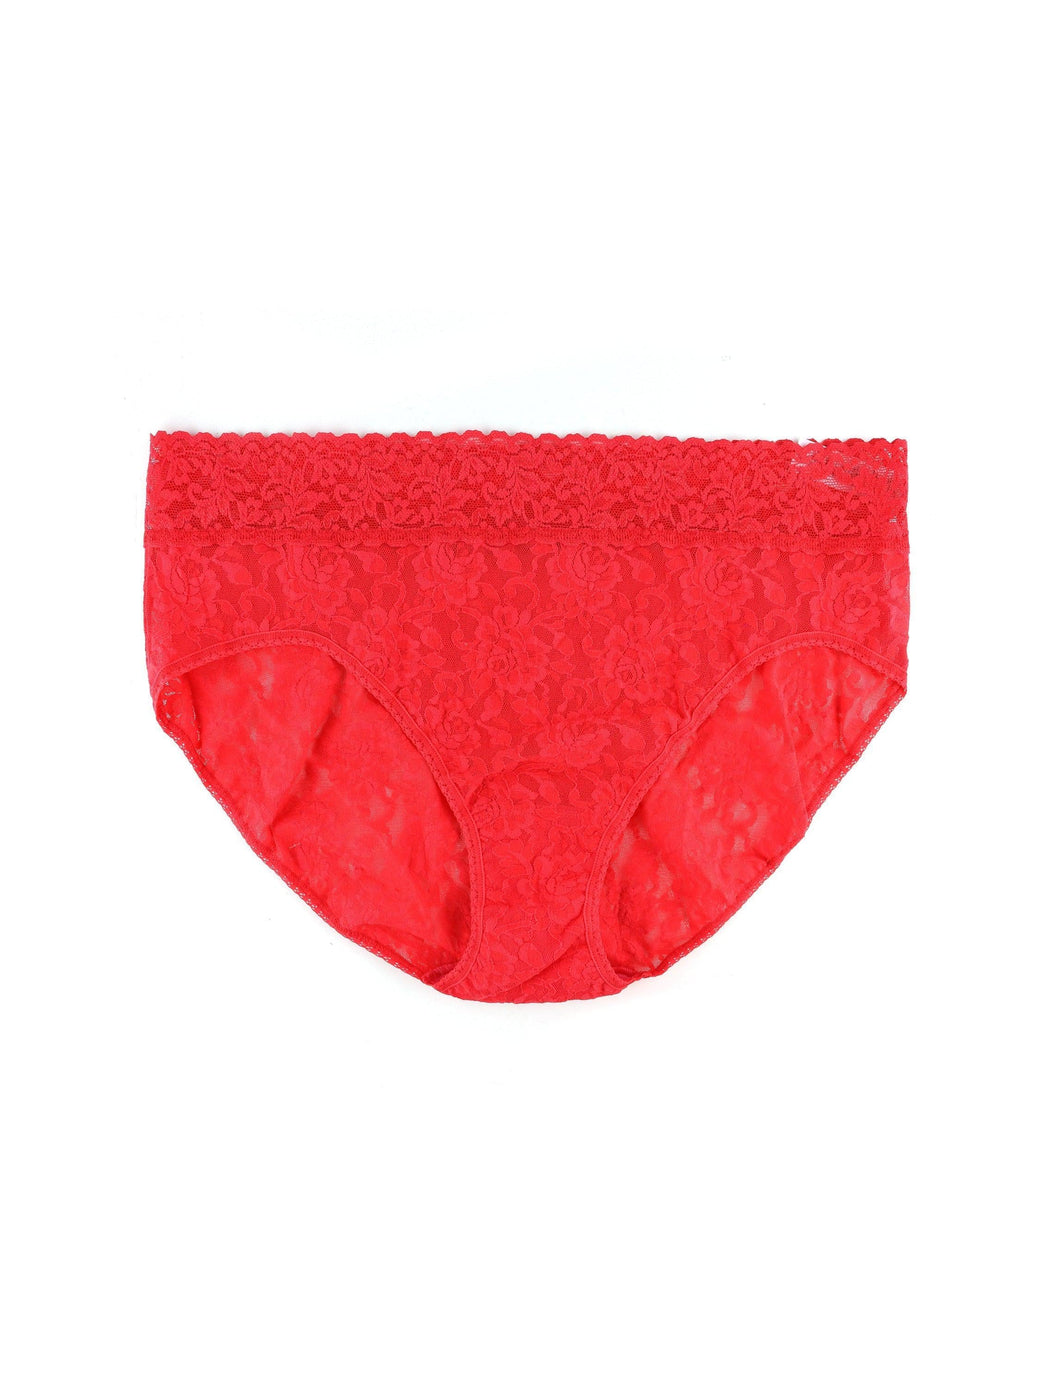 Plus Size Signature Lace French Brief Deep Sea Coral Red